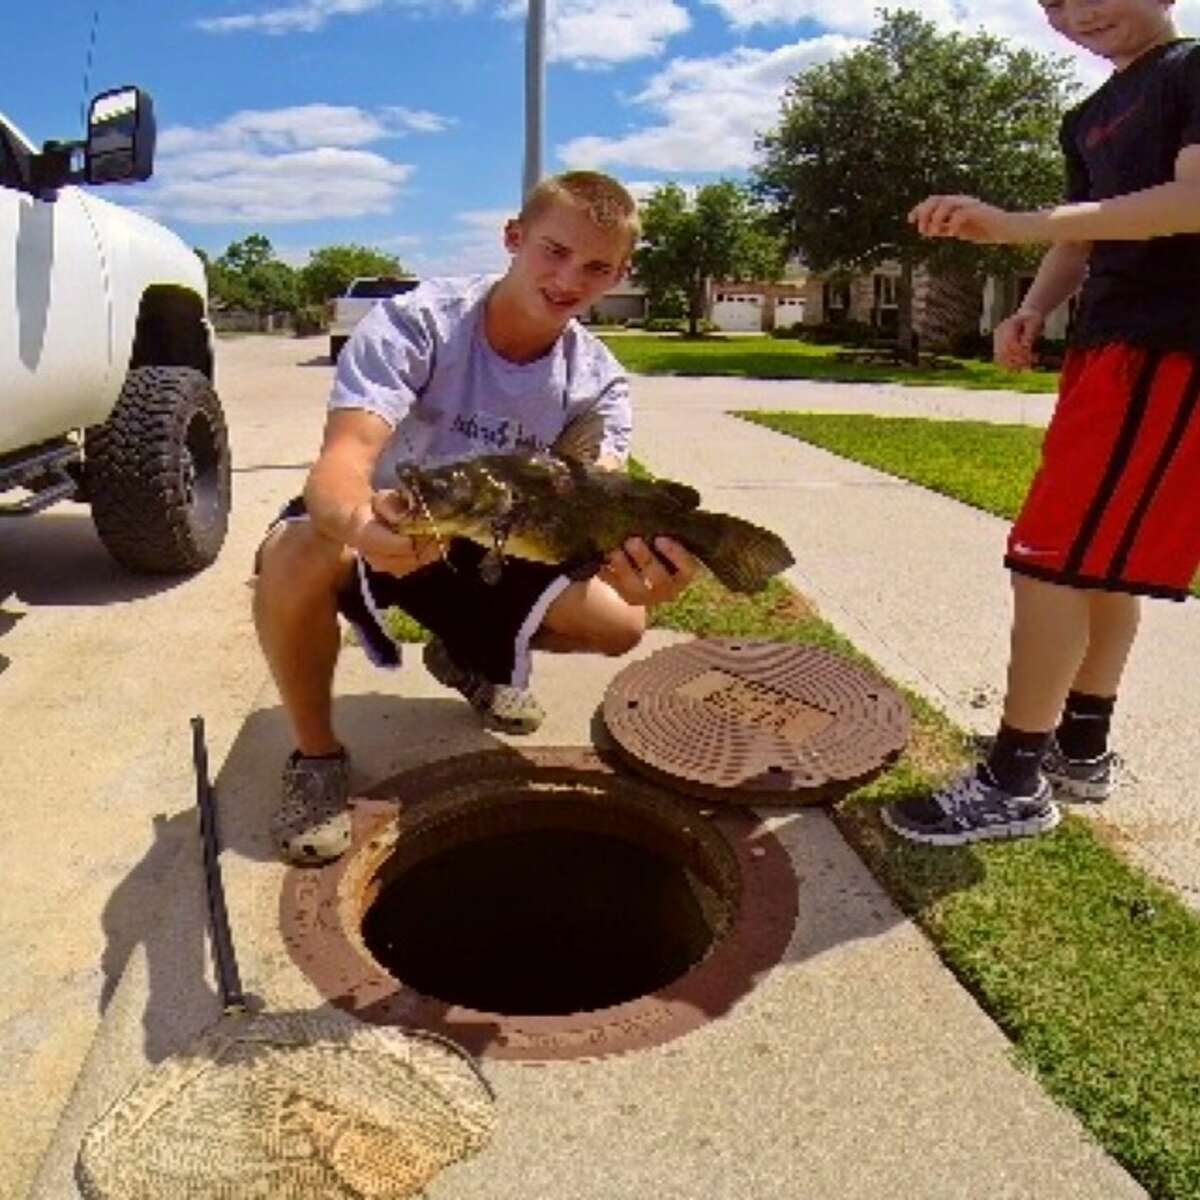 Kyle “The Fish Whisperer" Naegeli of Katy is a bit of daredevil when it comes to fishing. The 16 year old has shared videos to YouTube showing him catching fish in his neighborhood sewer, feeding fish in a nearby pond from his mouth, and snatching turtles out of the water by hand. Check out his continuing angling antics at https://www.youtube.com/user/fishboy242.